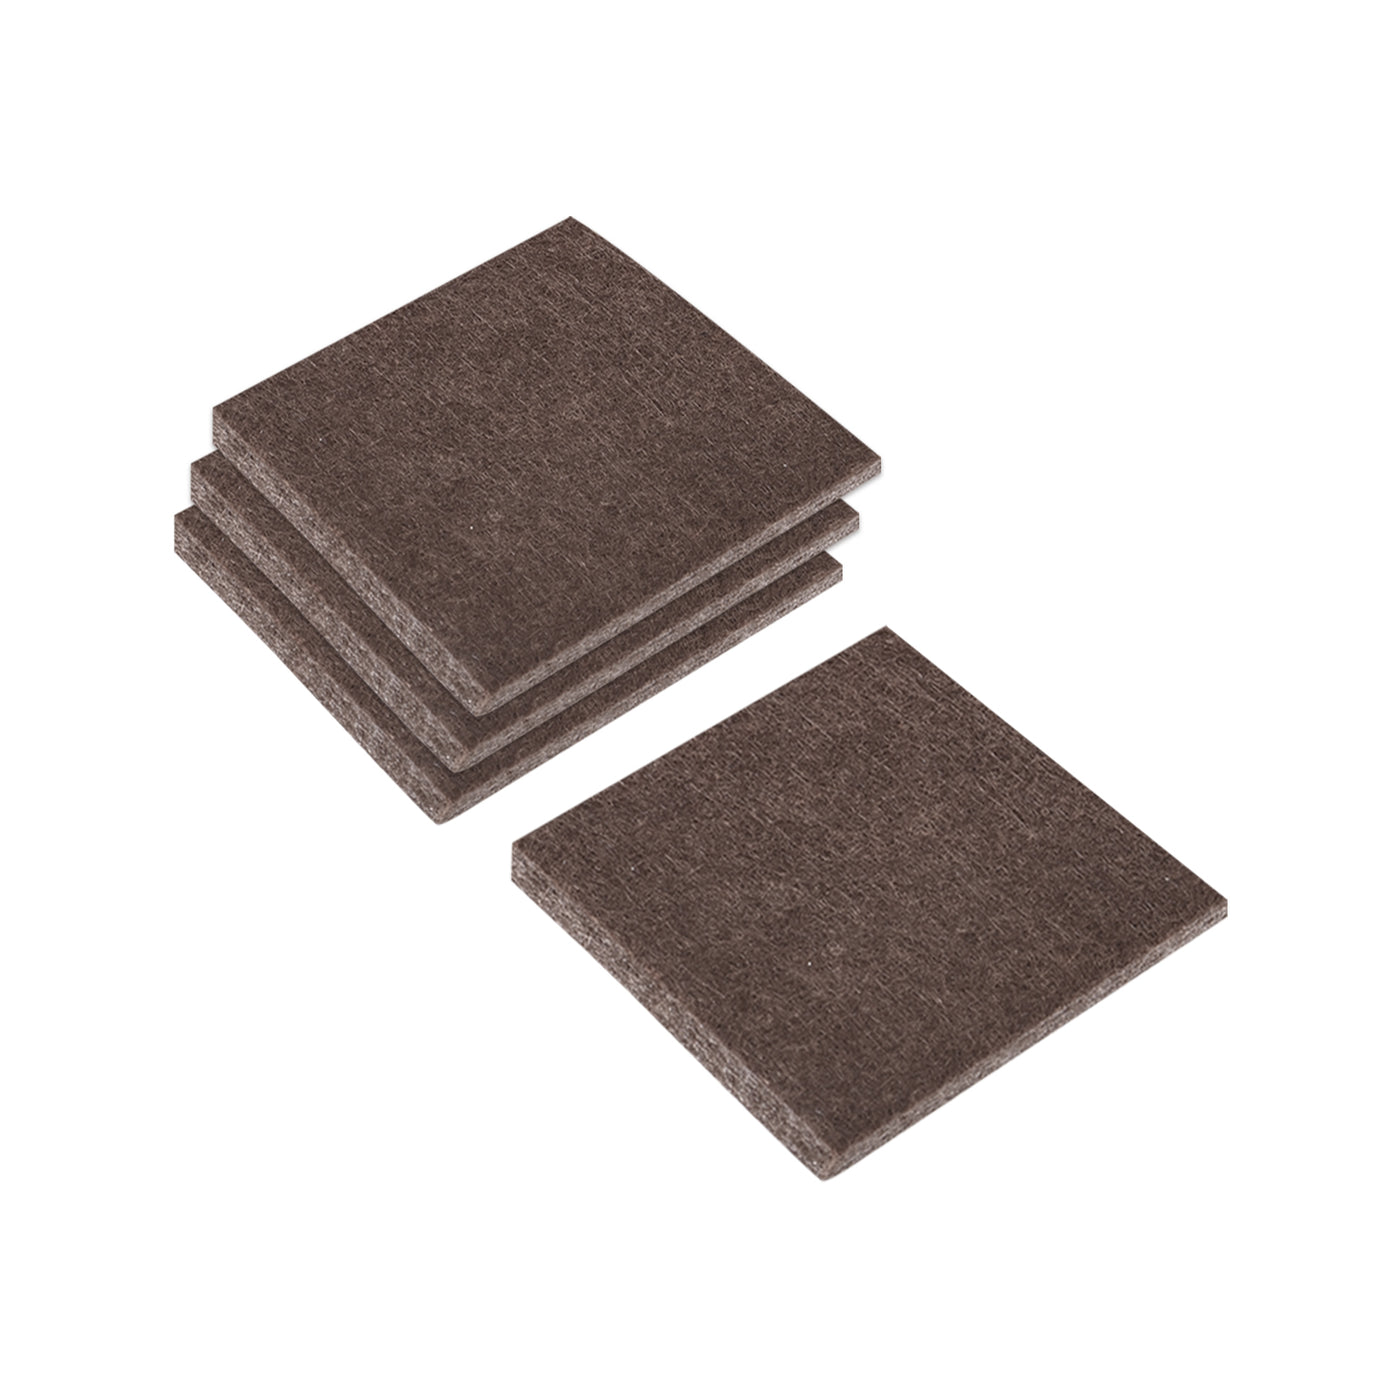 uxcell Uxcell Felt Furniture Pads, 43mm x 43mm Self Adhesive Square Floor Protectors for Furniture Legs Hardwood Floor, Brown 24Pcs